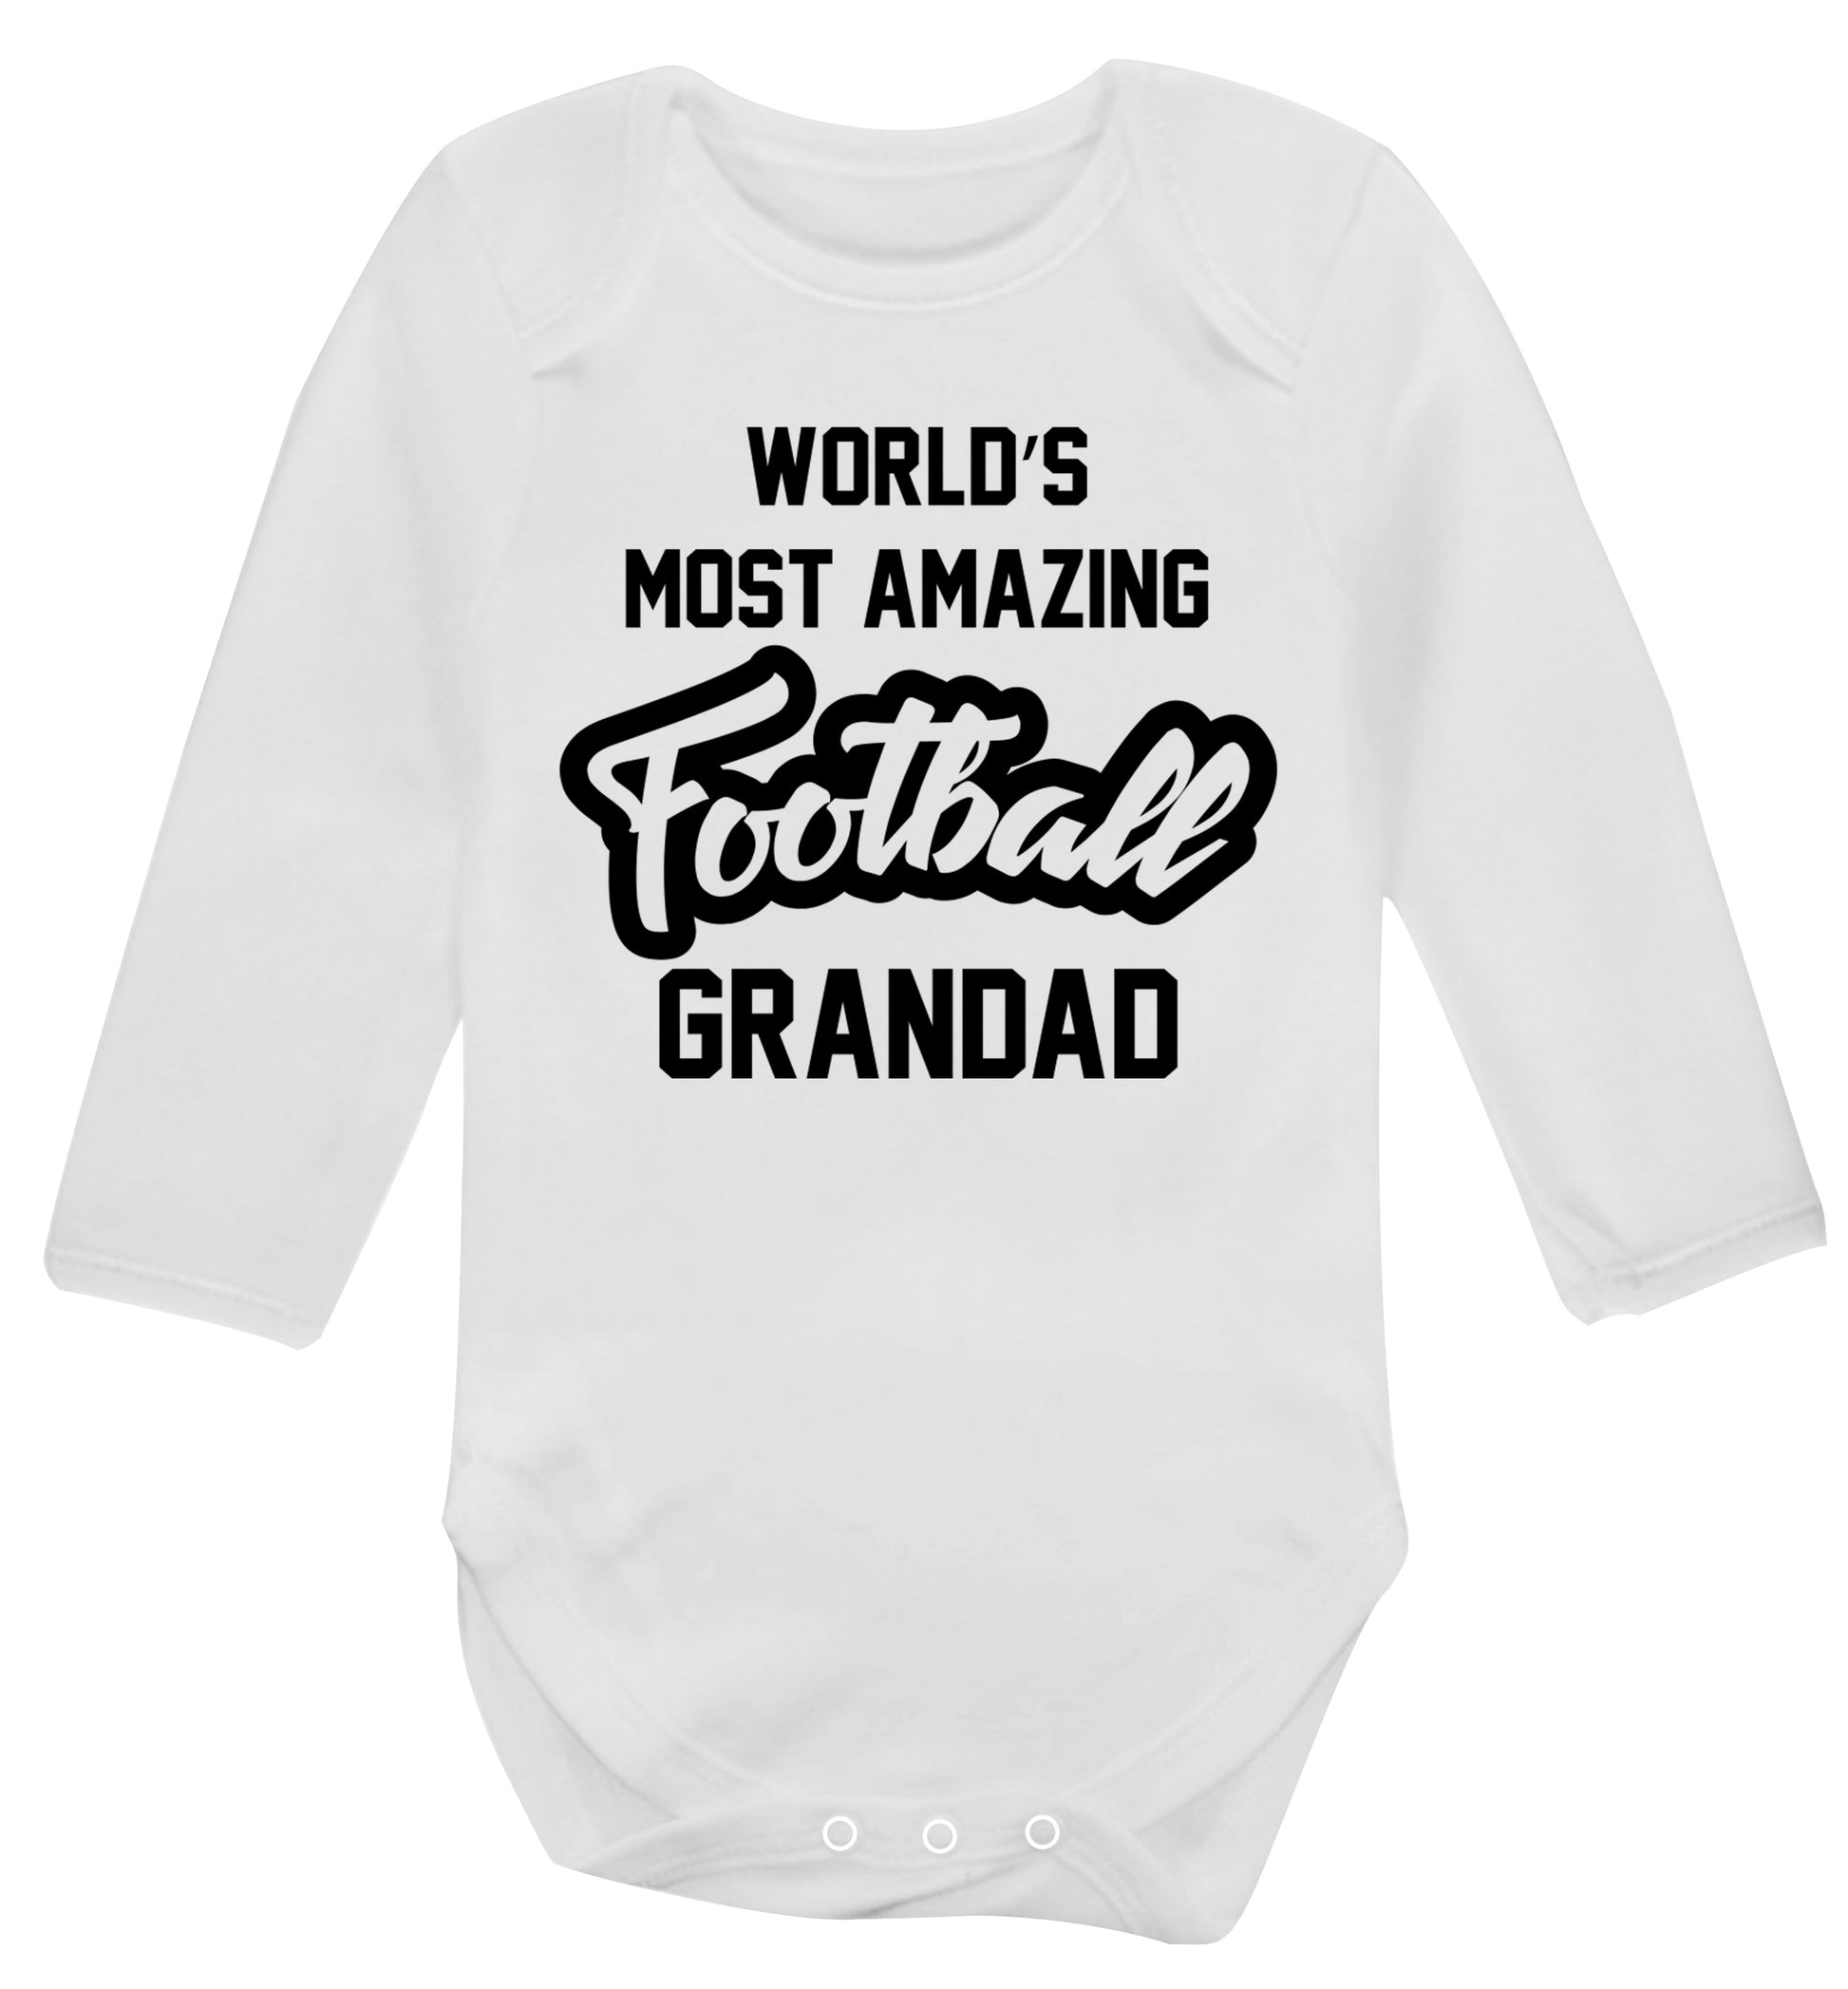 Worlds most amazing football grandad Baby Vest long sleeved white 6-12 months